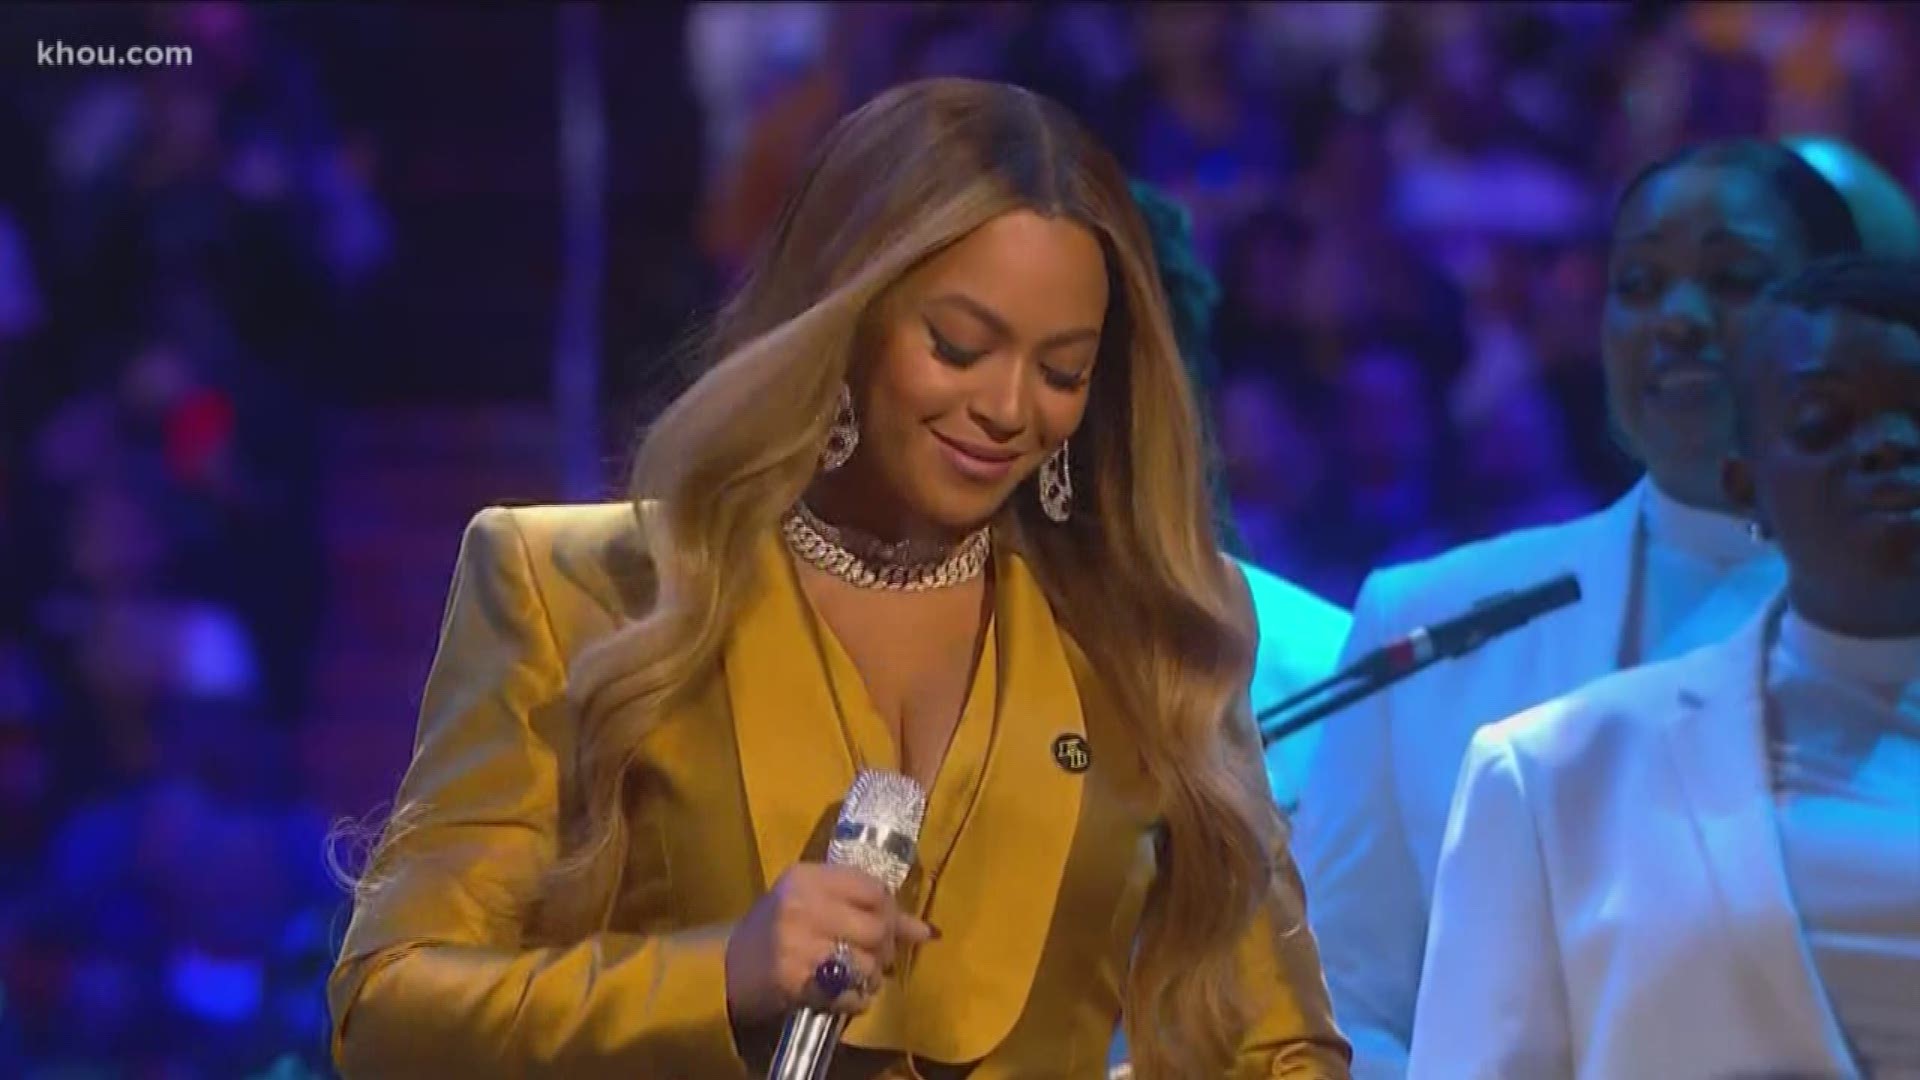 Houston's own Beyonce opened up the celebration of life for Kobe Bryant on Monday.